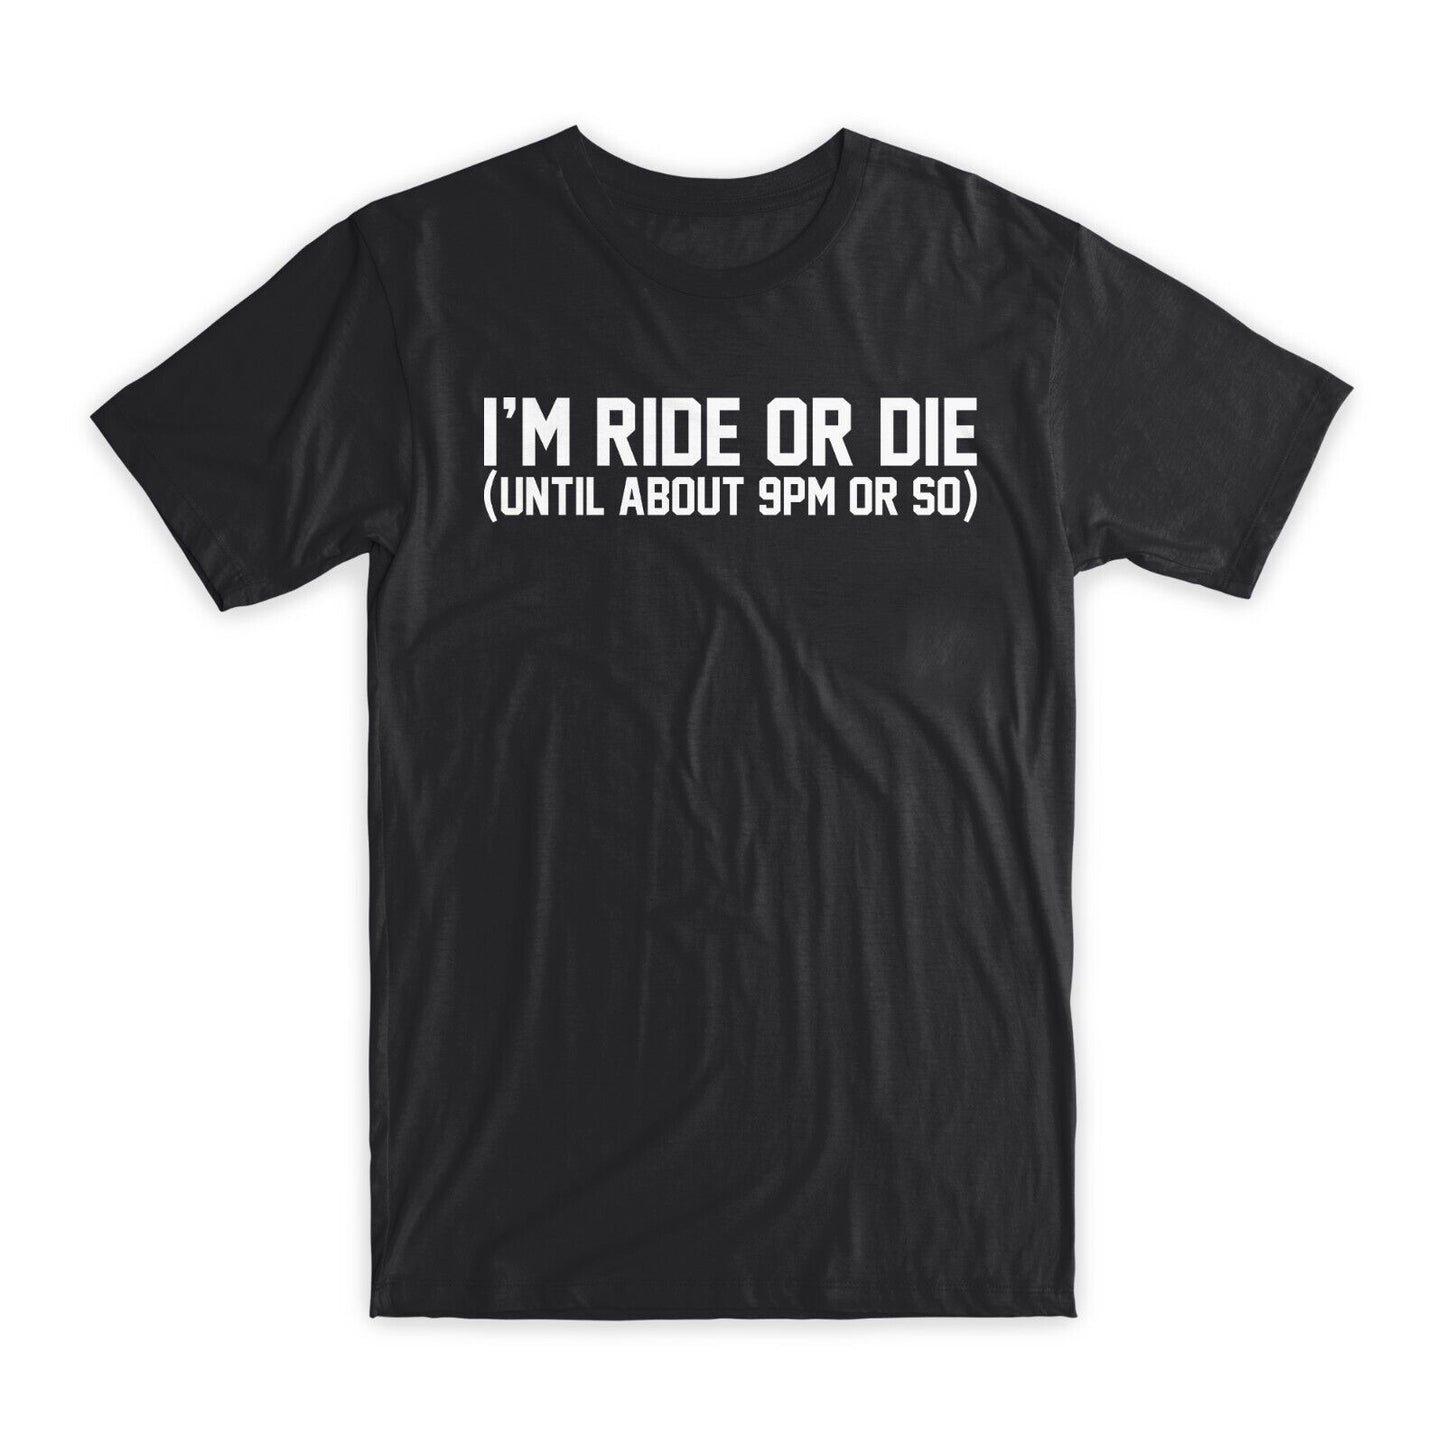 I'm Ride or Die T-Shirt Premium Soft Cotton Crew Neck Funny Tee Novelty Gift NEW